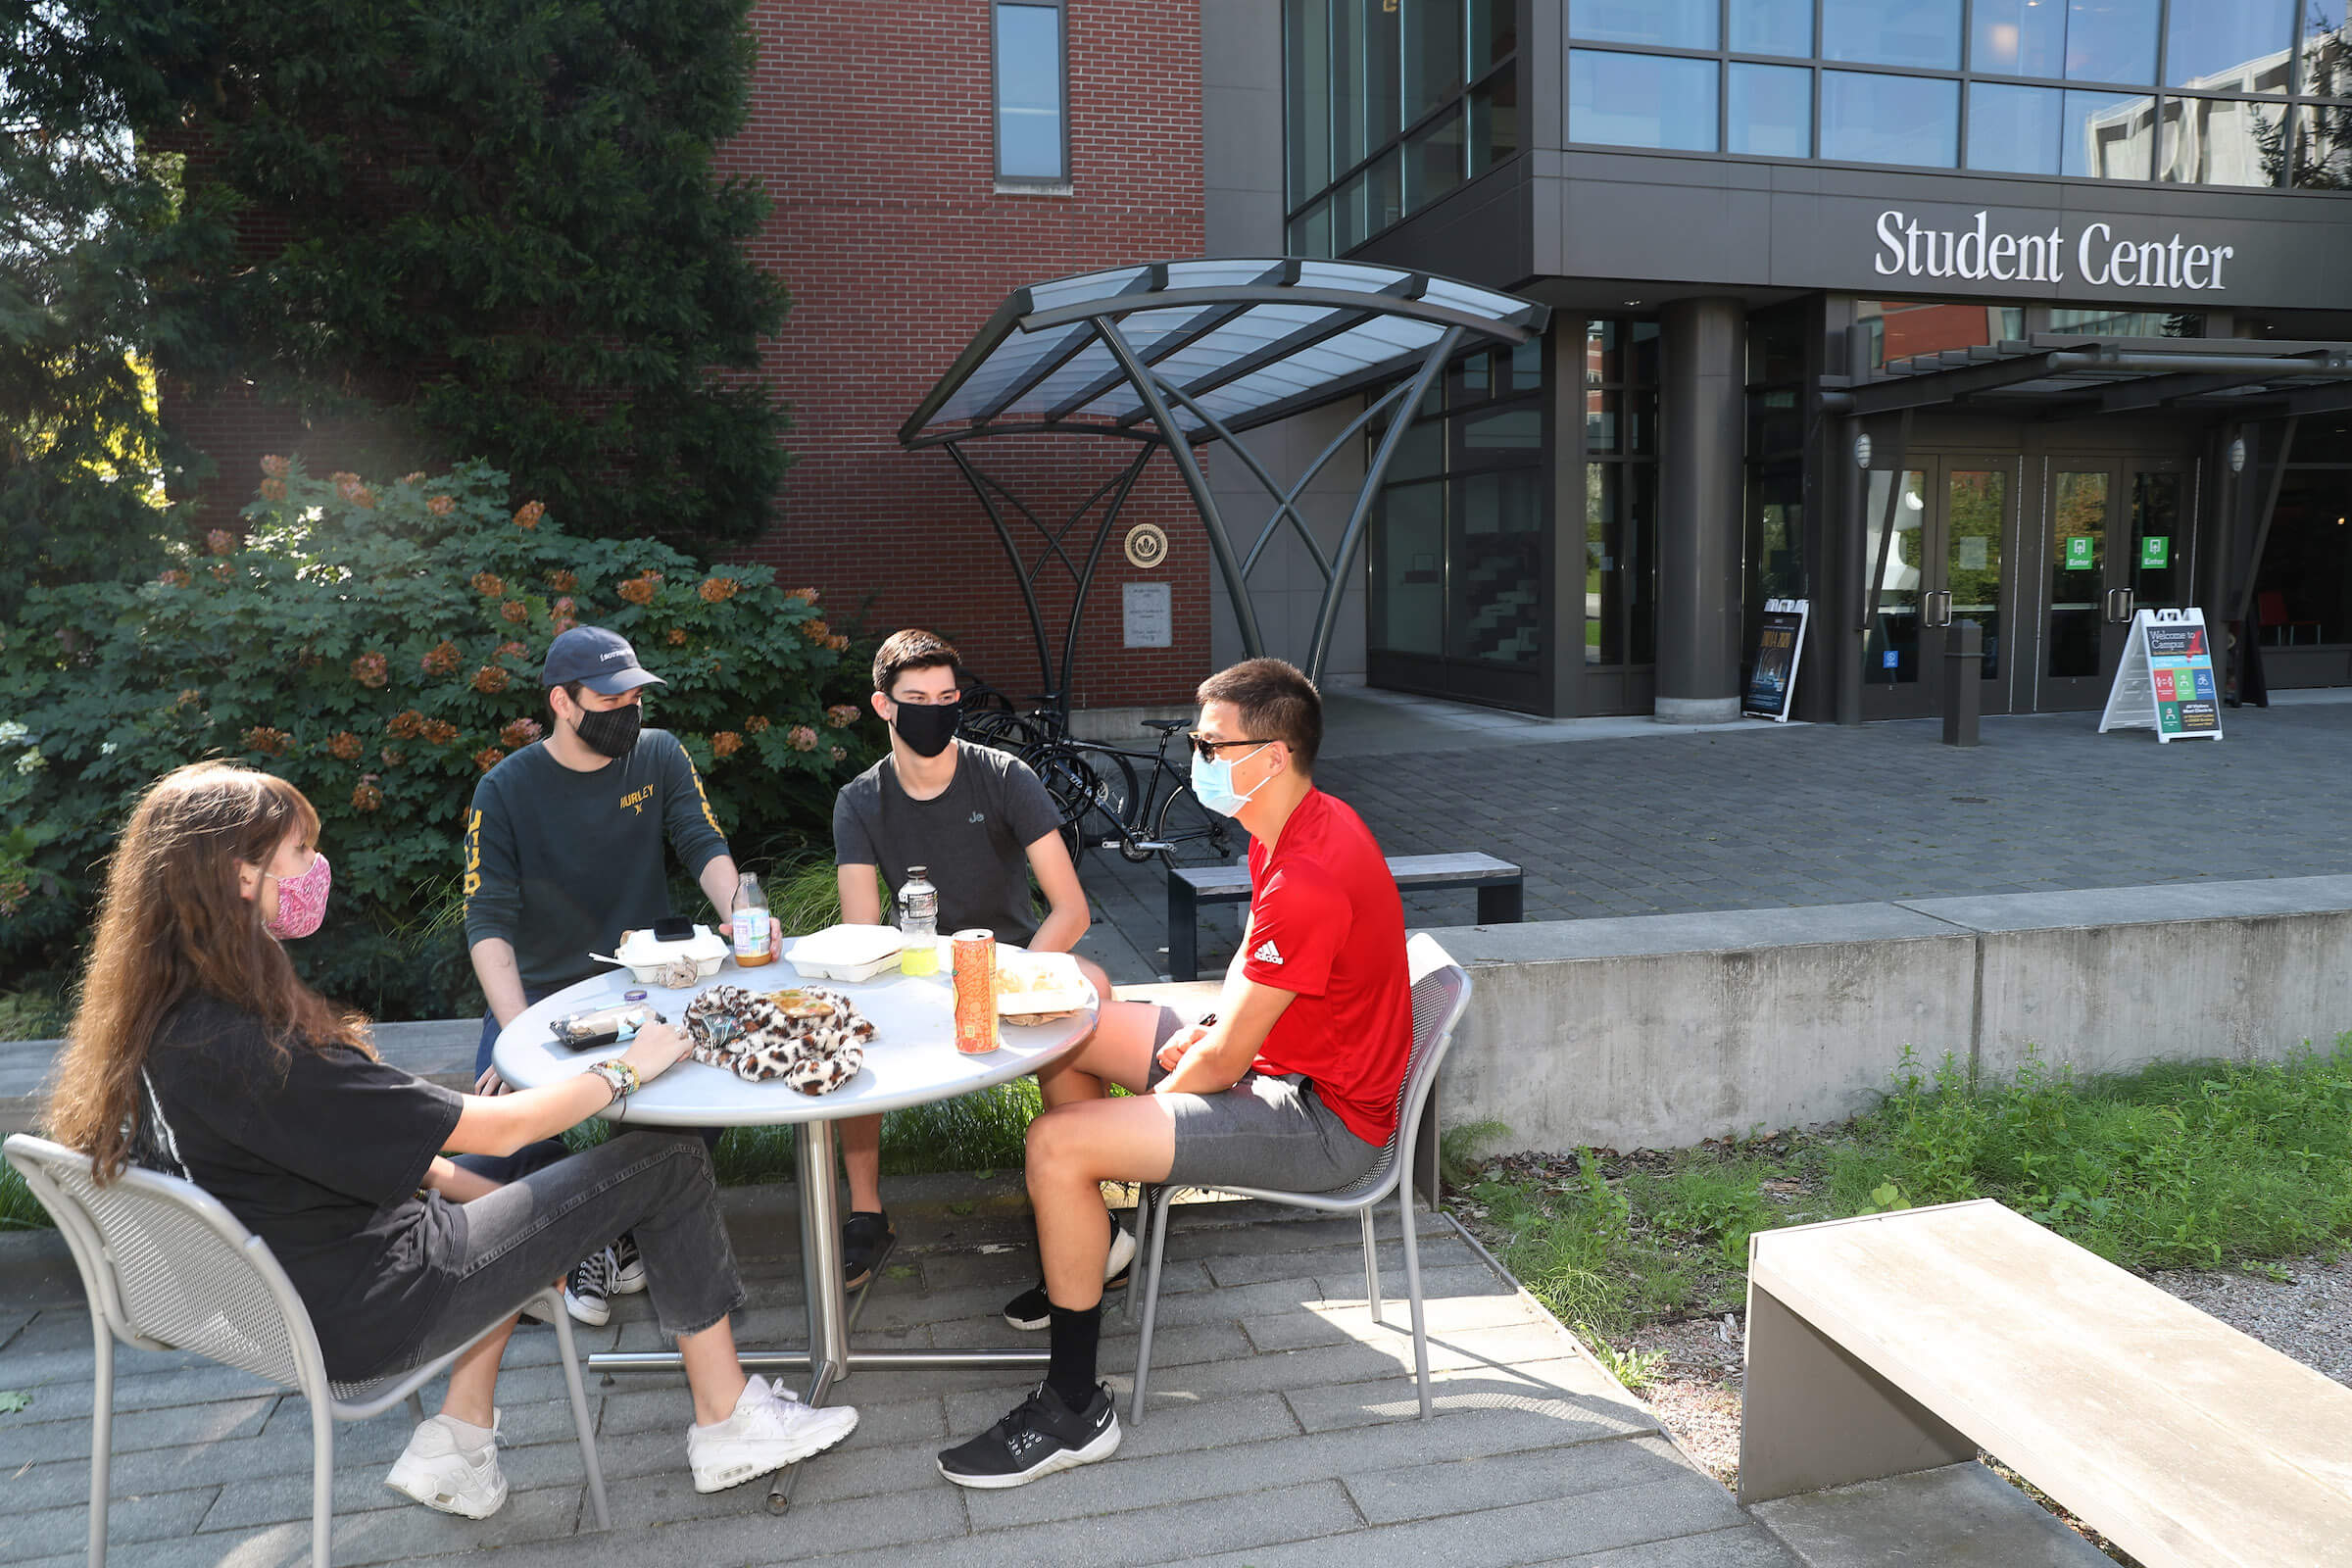 Photo on right features four students sitting at an outdoor table on campus while wearing face coverings.